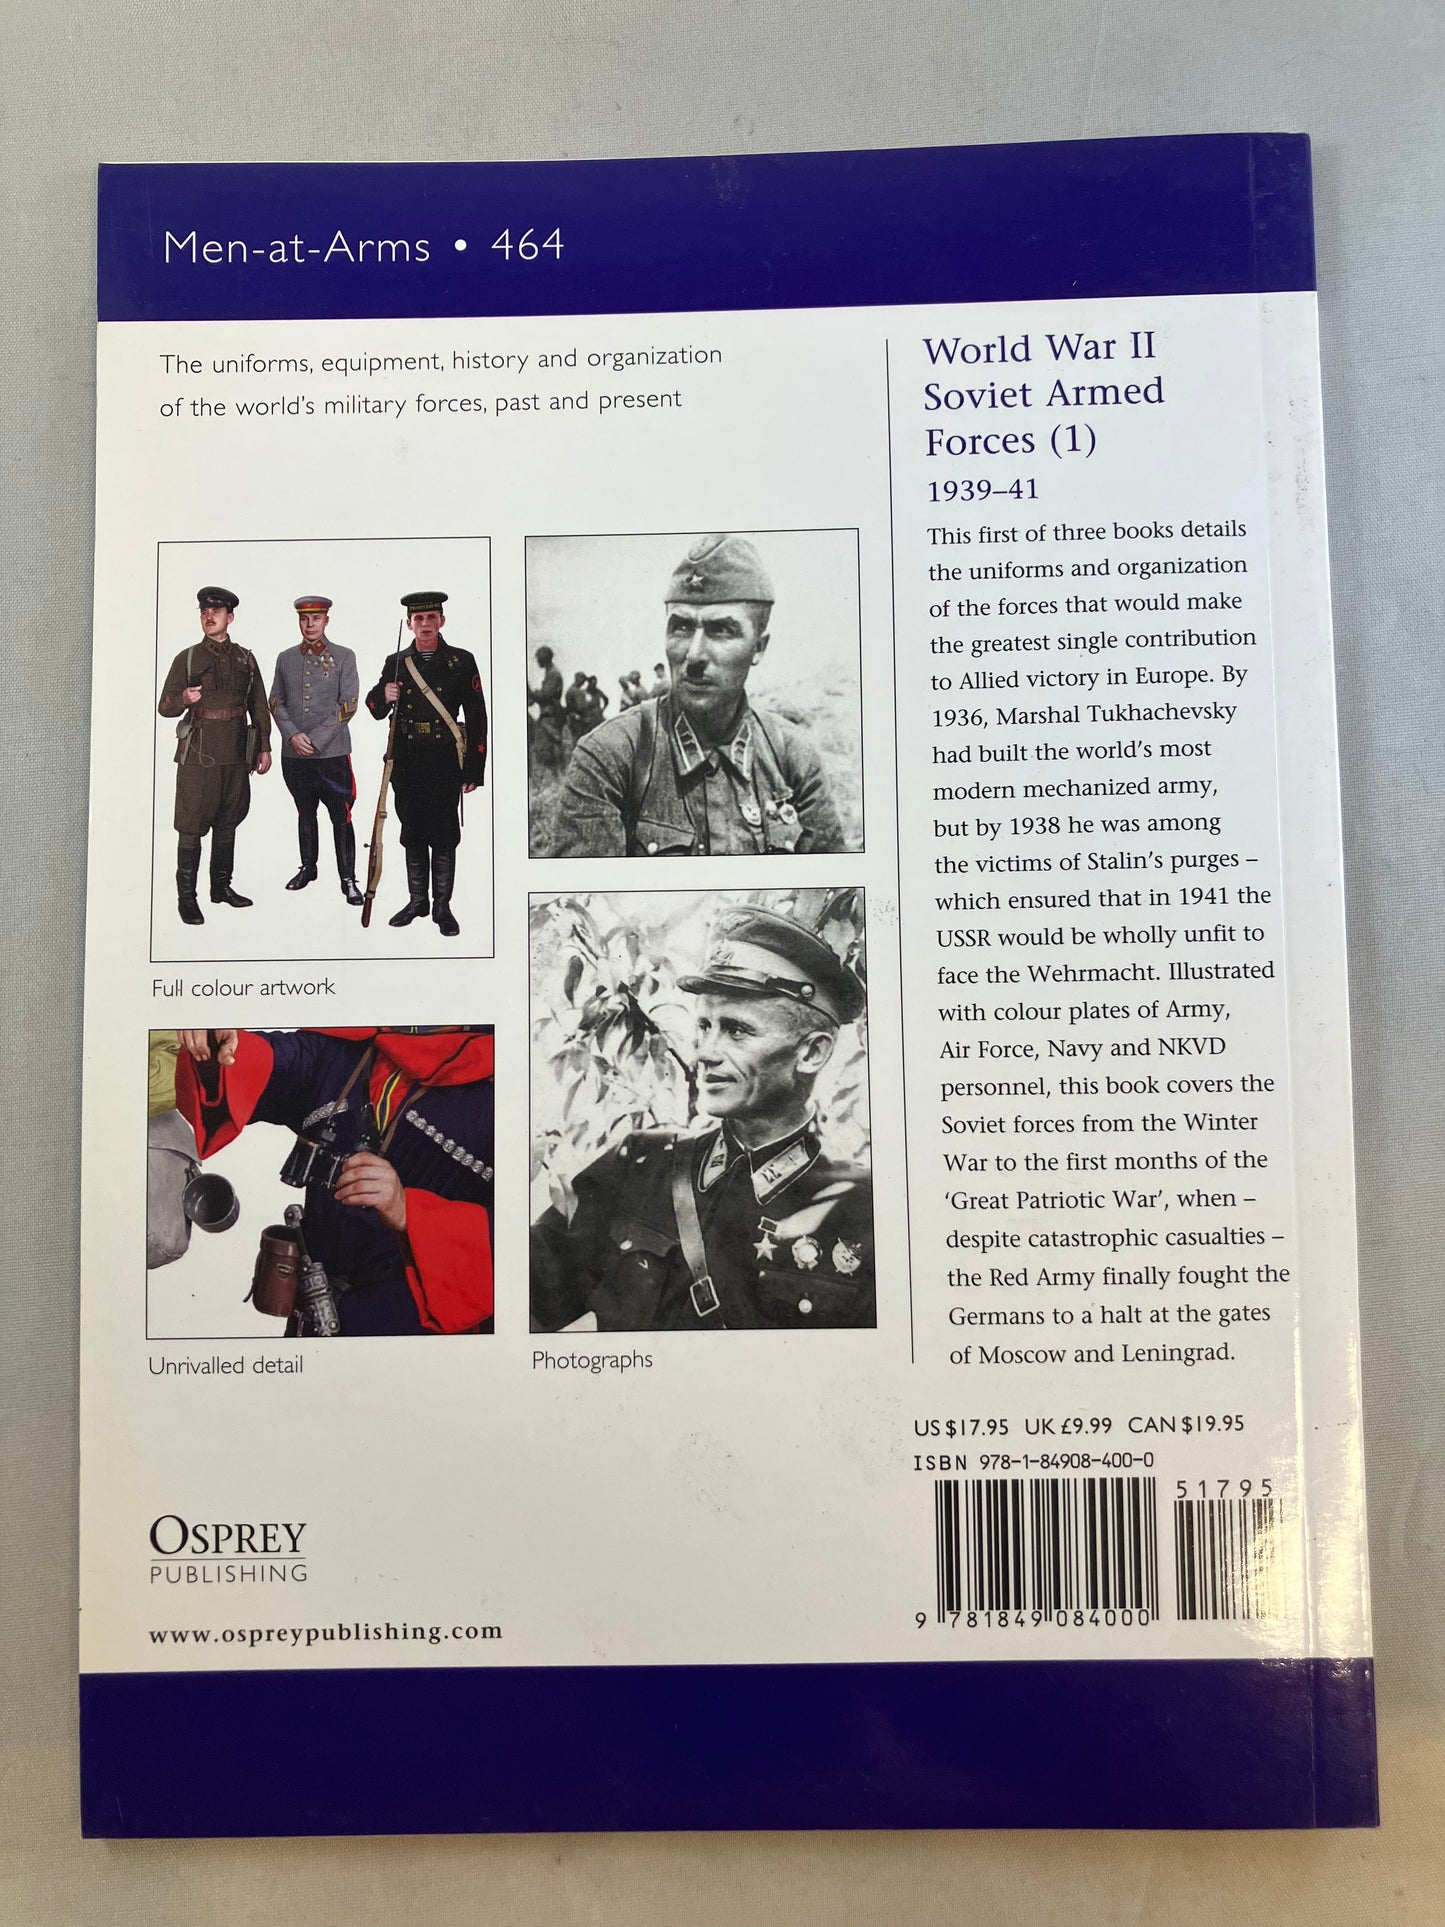 WWII Soviet Armed Forces 1 Osprey Book